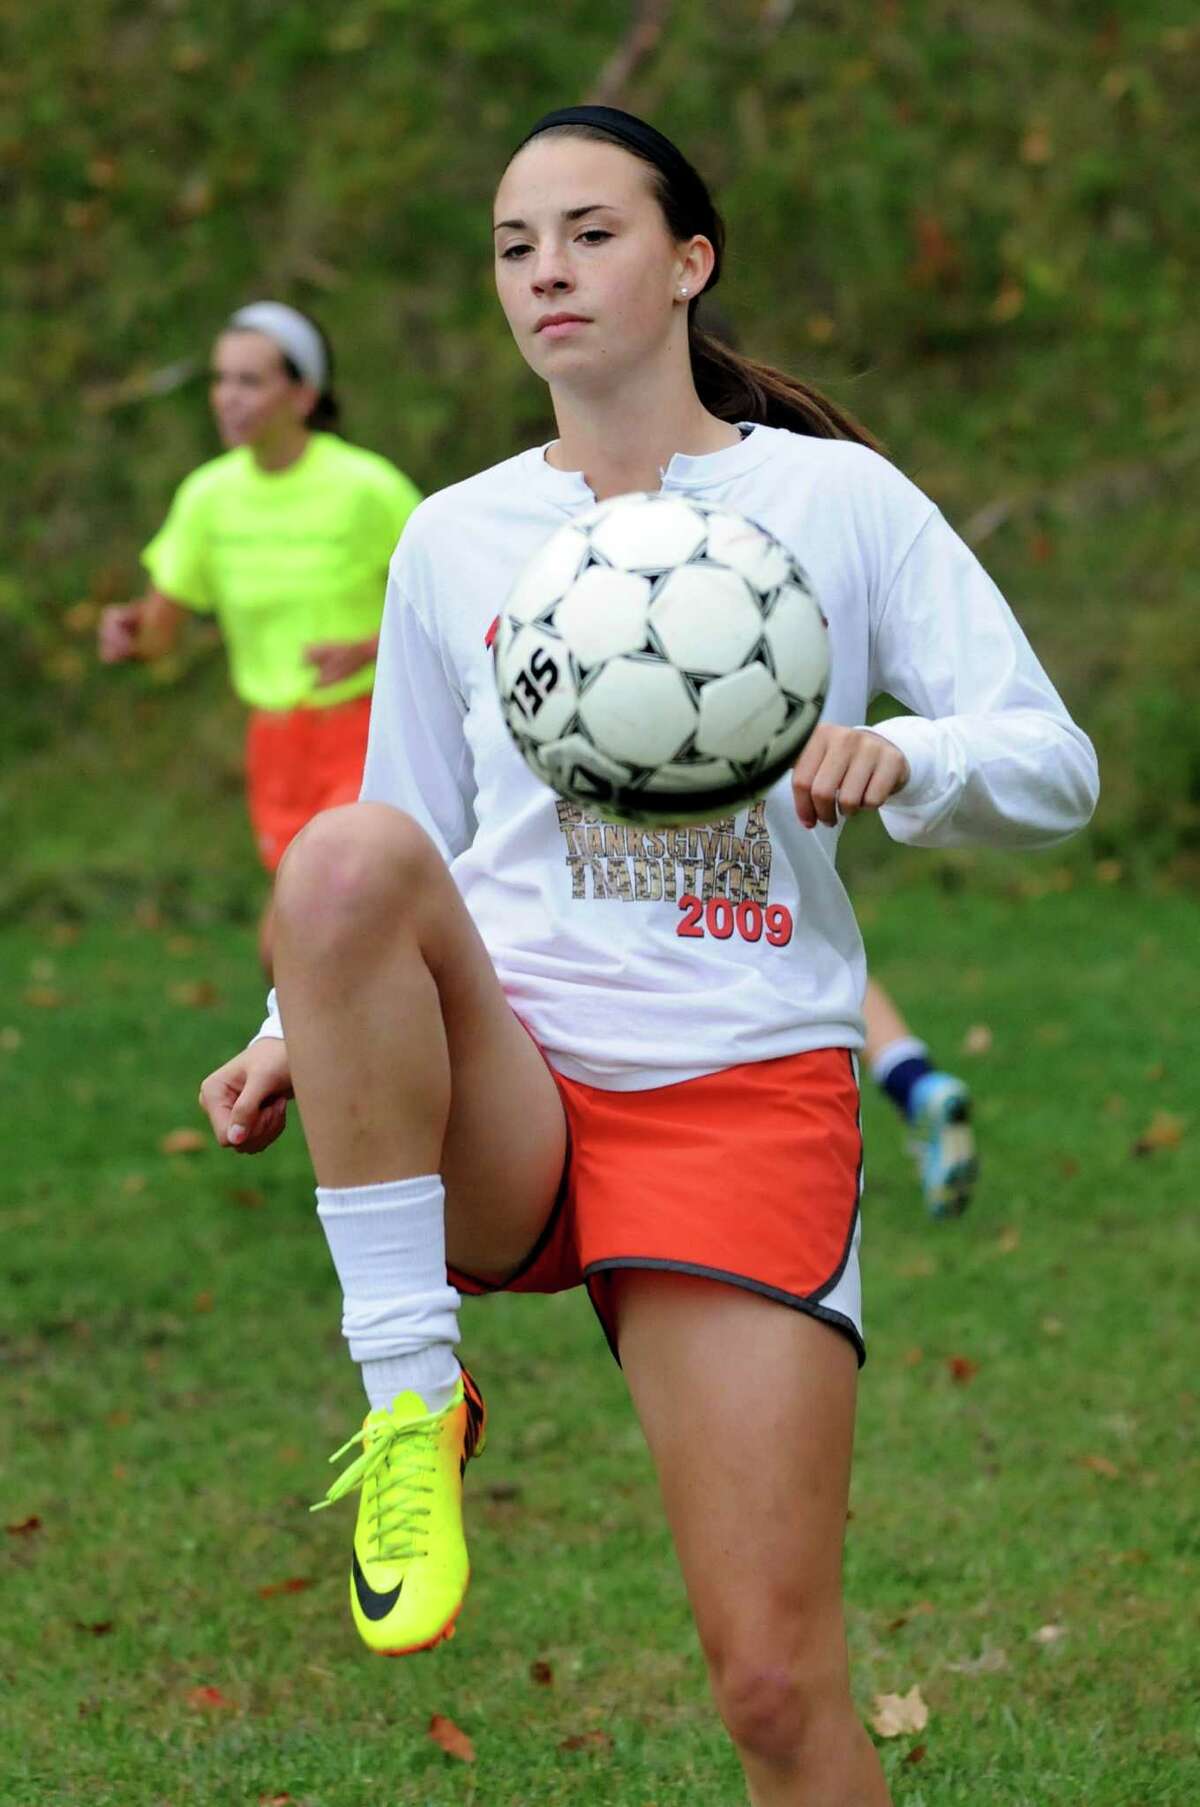 Catholic Central's Kelsey Moss during soccer practice on Thursday, Oct. 10, 2013, at Catholic Central High School in Lansingburgh, N.Y. (Cindy Schultz / Times Union)